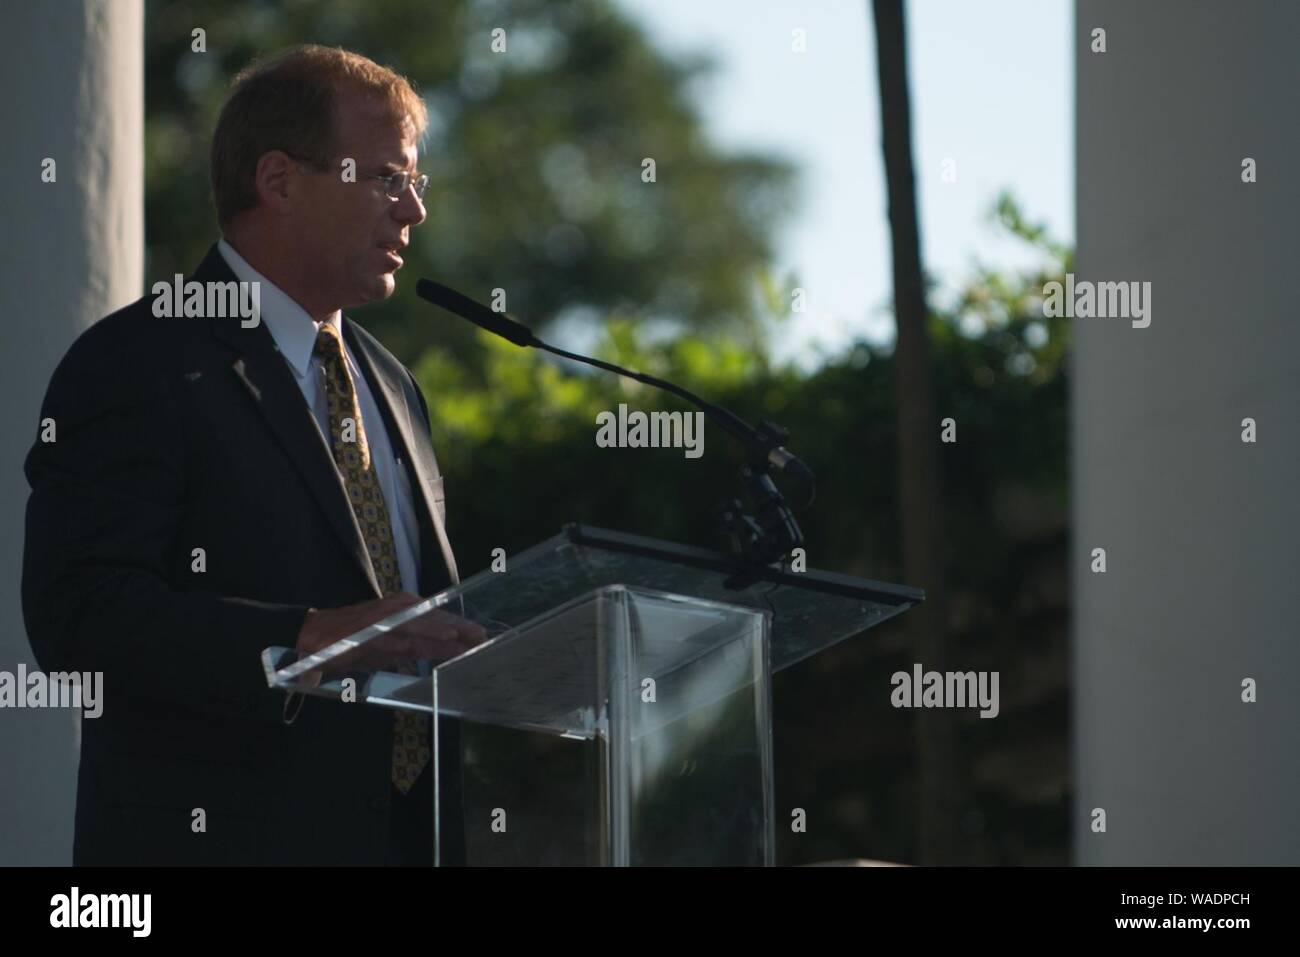 Doug Black Ceo John Deere Landscapes Gives Remarks During The Opening Ceremony For The National Association Of Landscape Professionals 99 19th Annual Renewal And Remembrance At Arlington National Cemetery 19857649542 Stock Photo Alamy